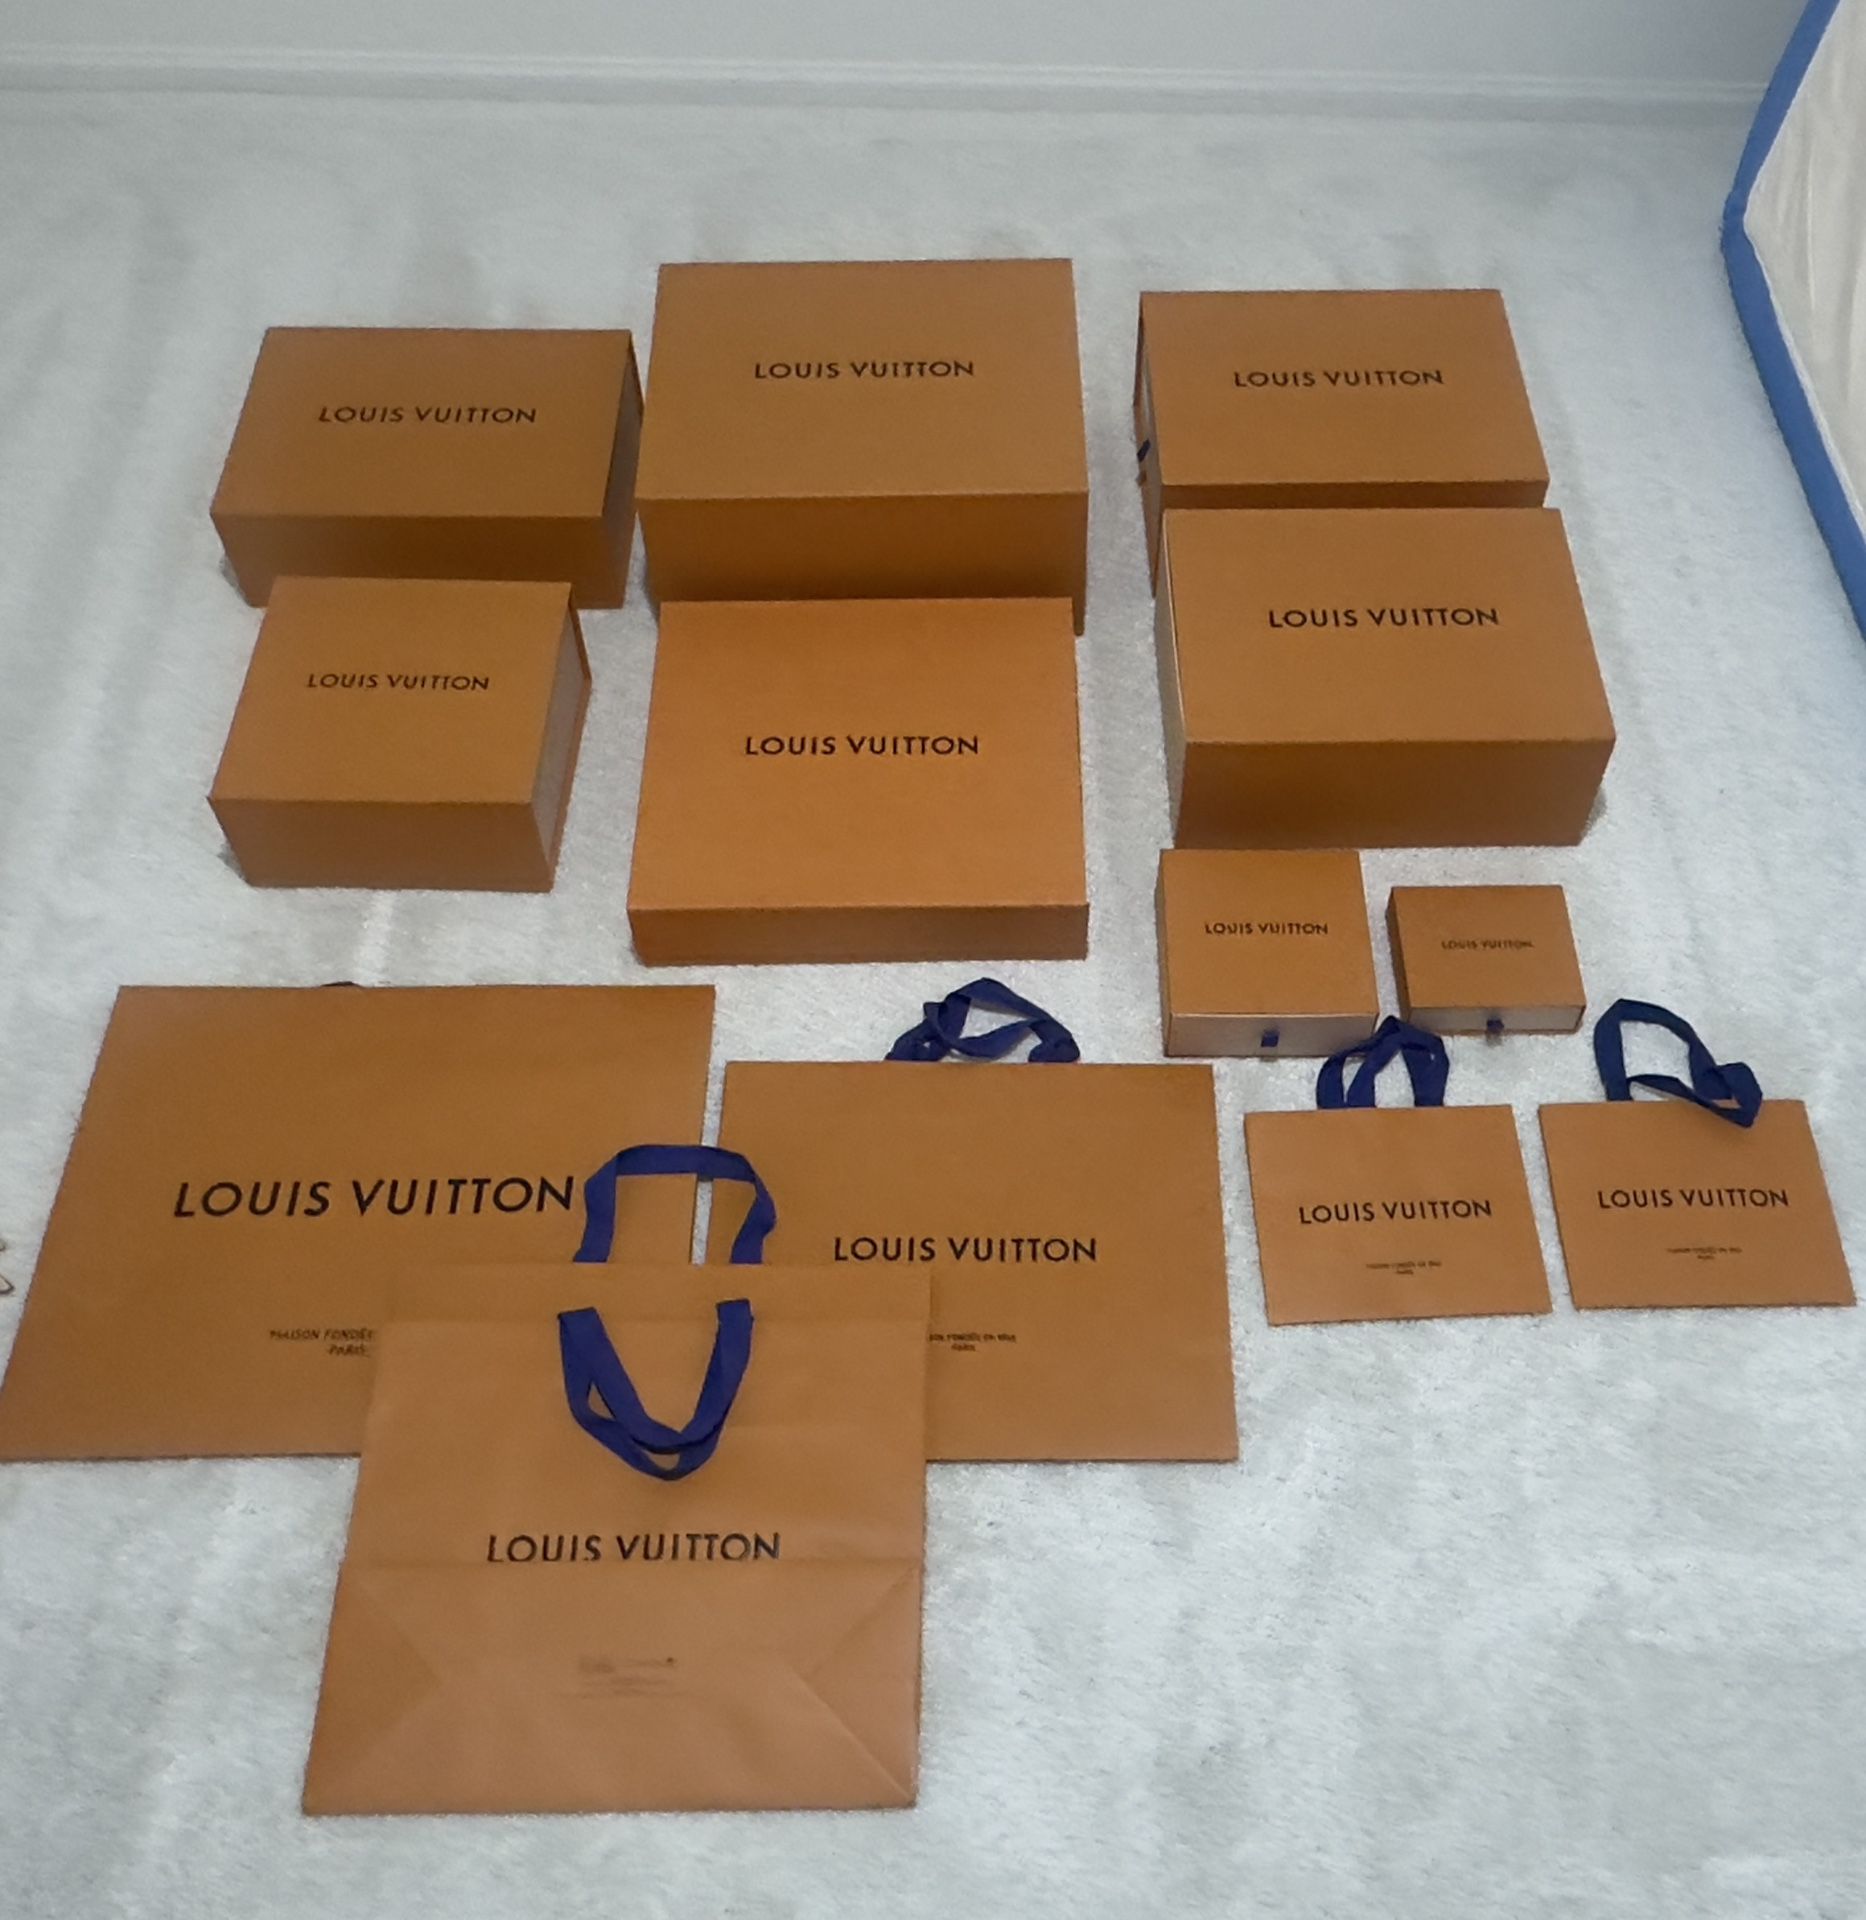 Louis Vuitton Boxes And Bags 